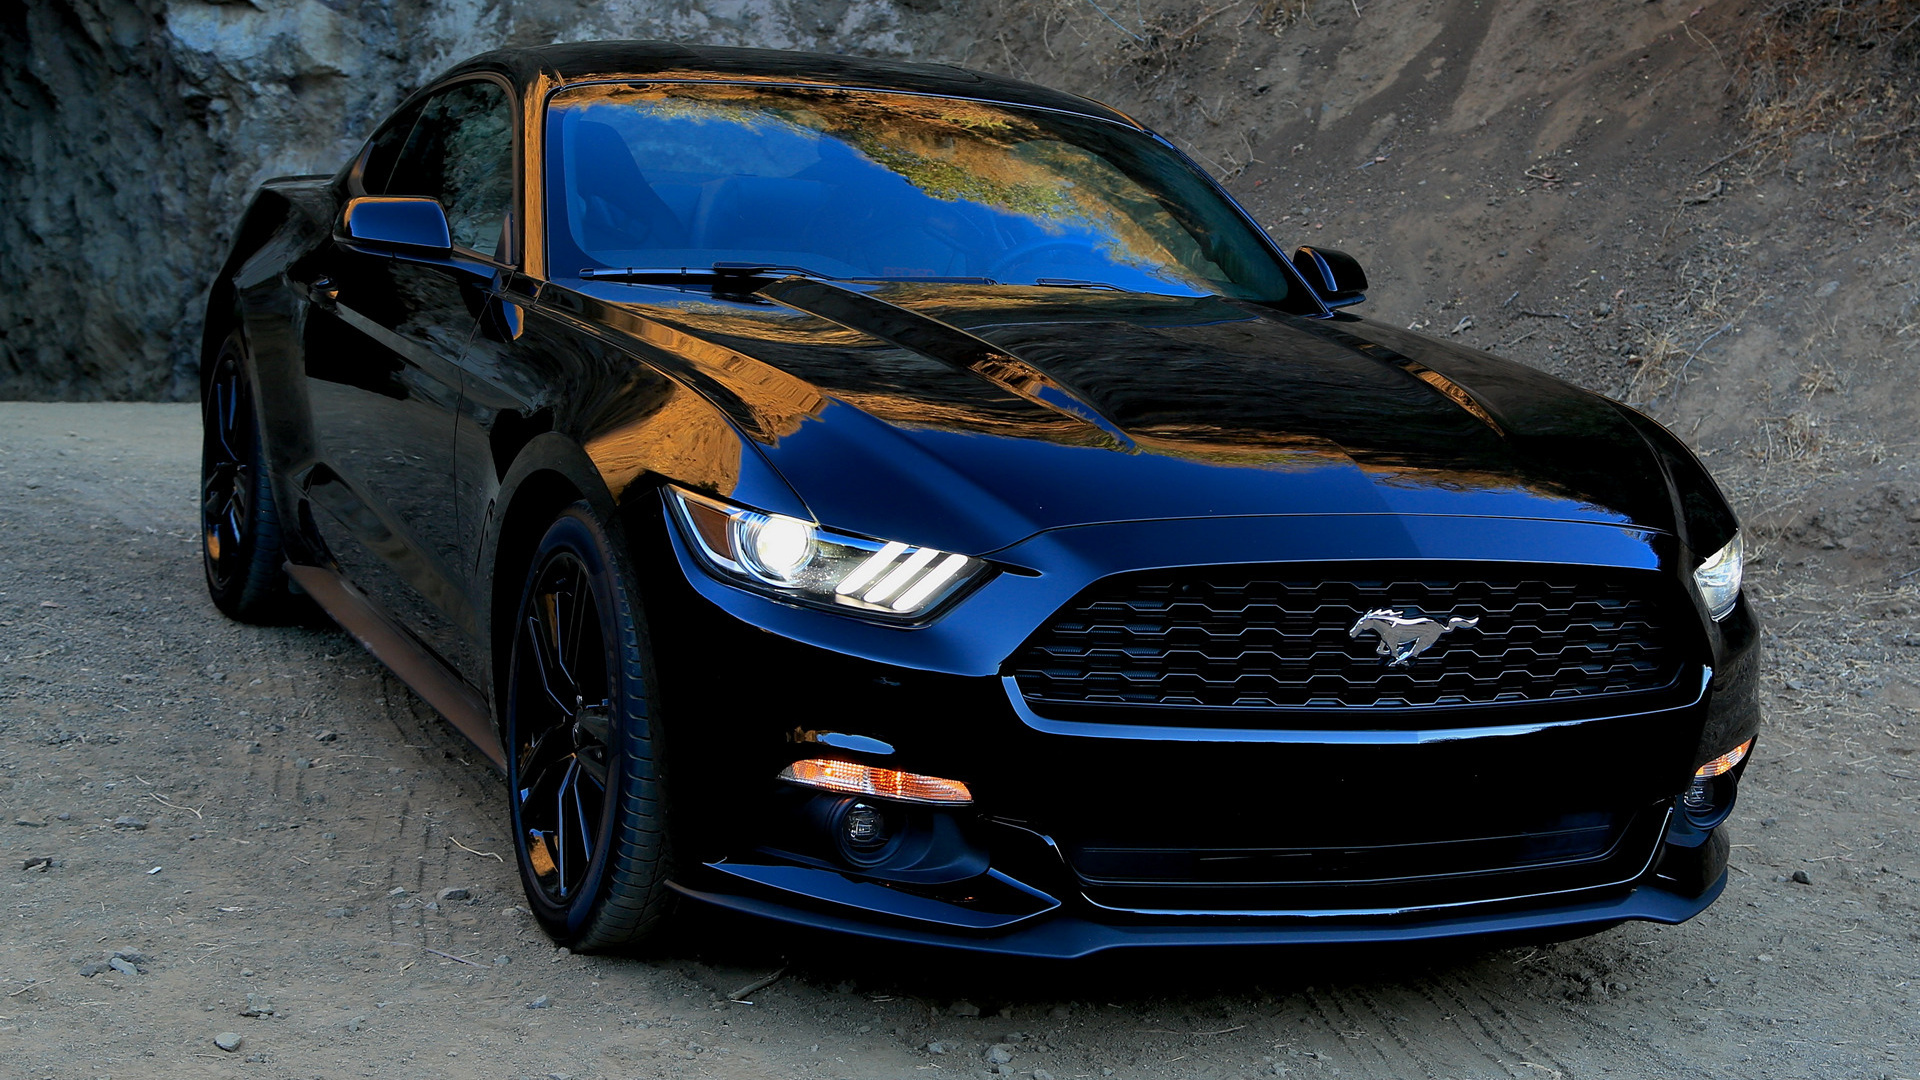 Ford Mustang: S550, The sixth-generation, 2015-2023, Includes fully independent rear suspension on all models. 1920x1080 Full HD Wallpaper.